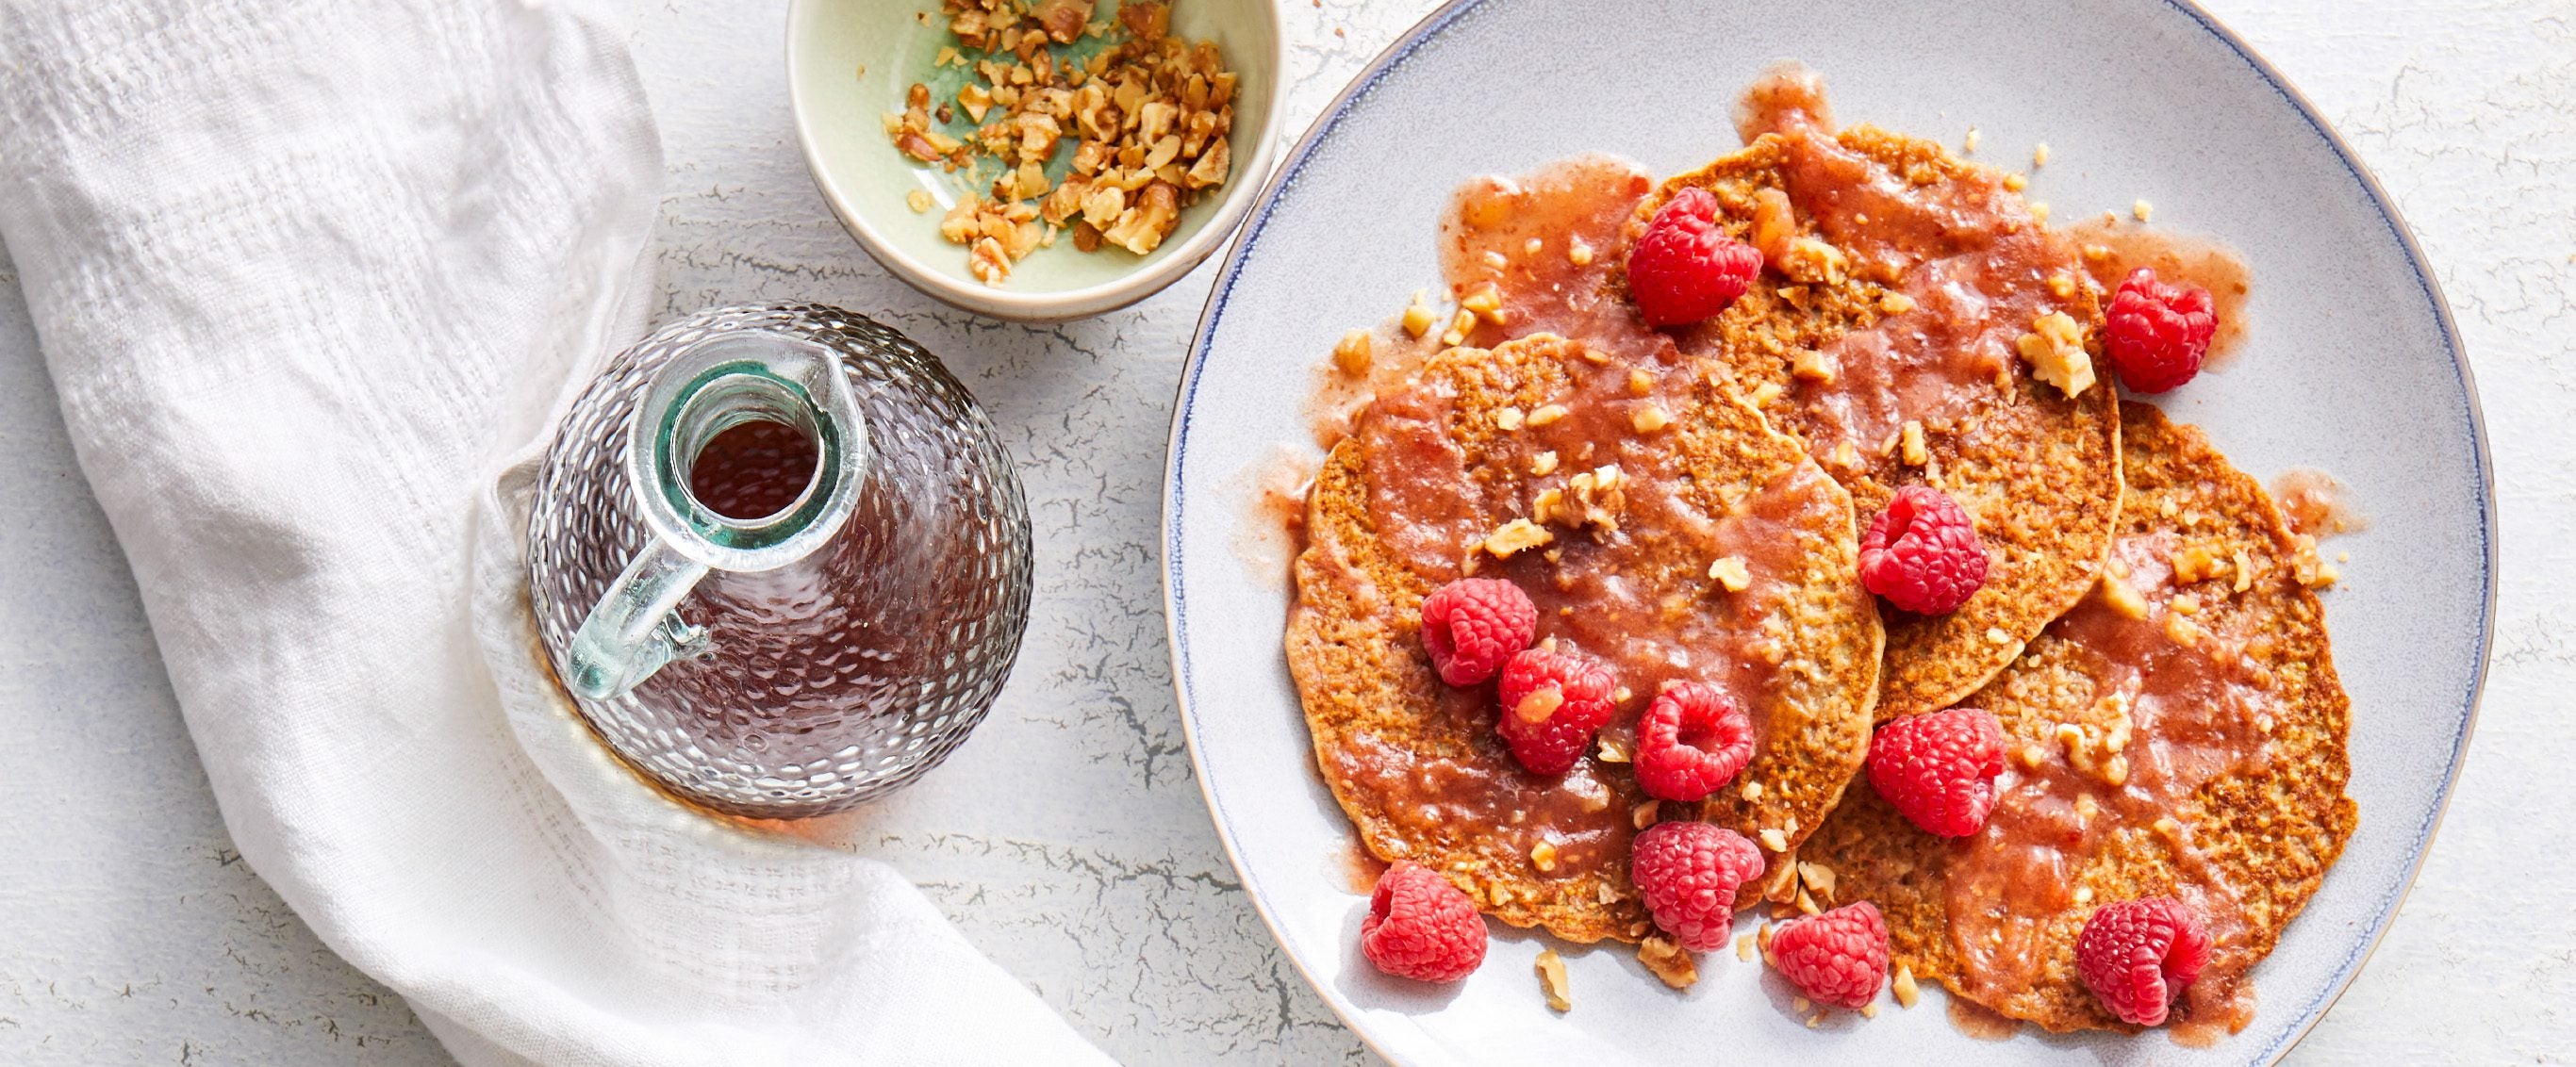 Oatmeal-Lemon Pancakes with Raspberry-Date Syrup